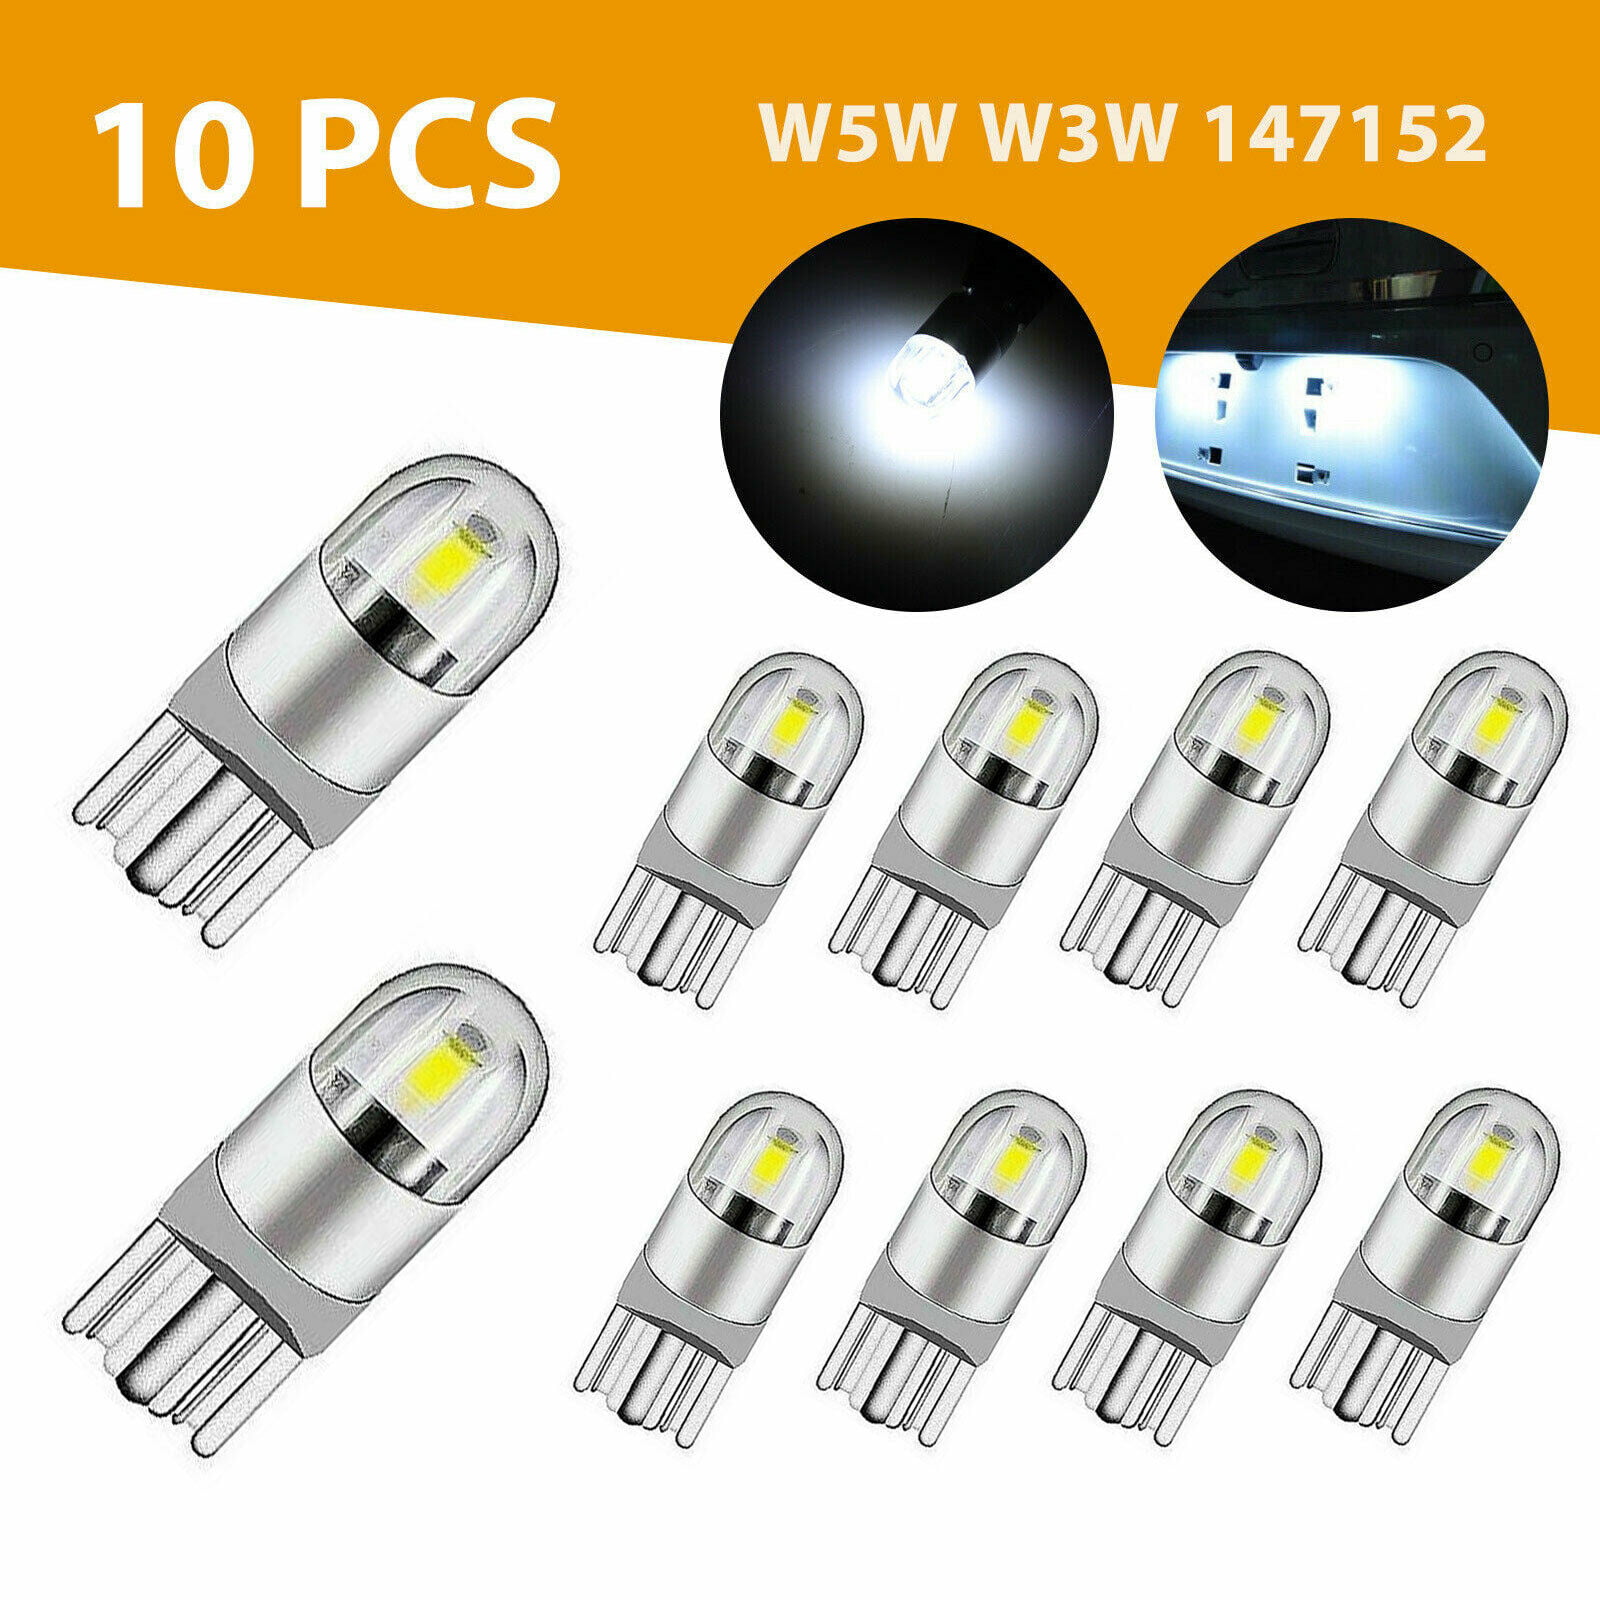 10PC/PACK Canbus T10 168 194 W5W 2825 Dome License Side Marker LED Light Bulb